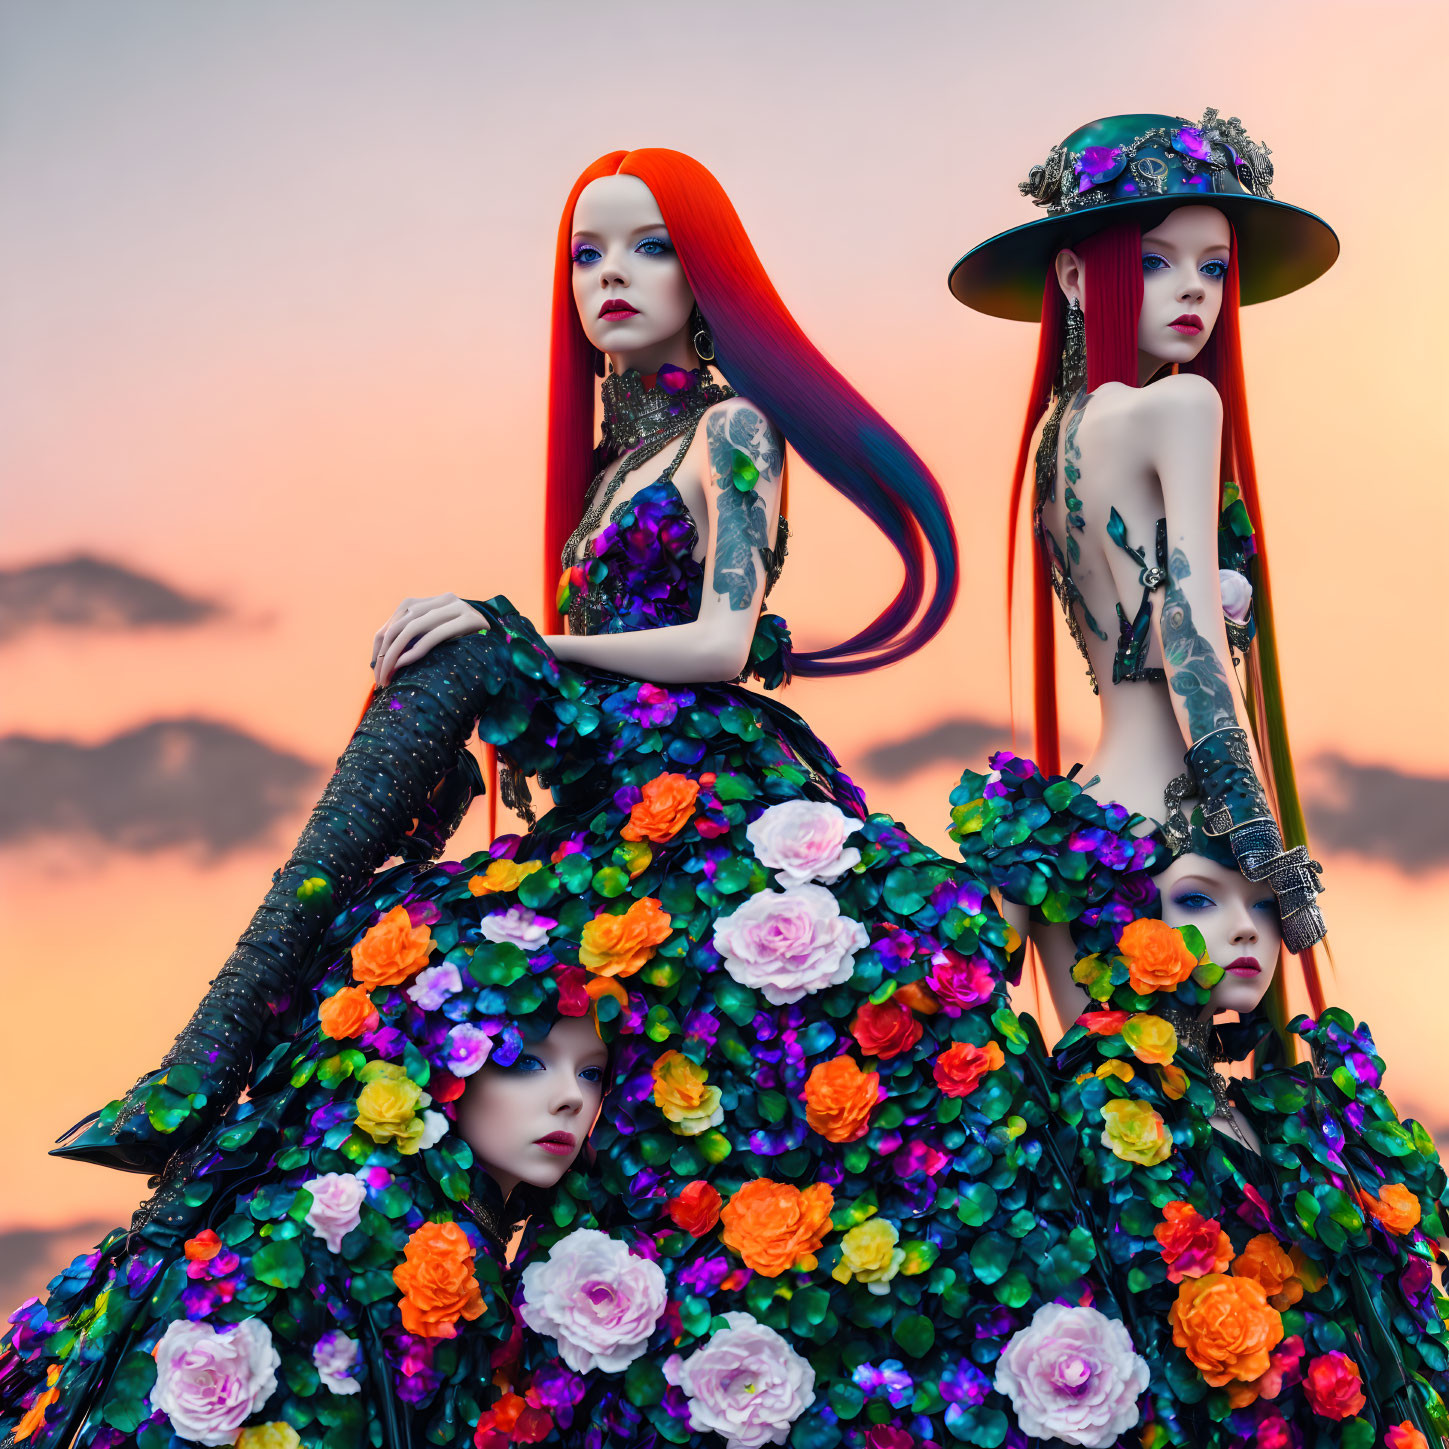 Mannequins in Floral Dresses and Vibrant Hair at Sunset